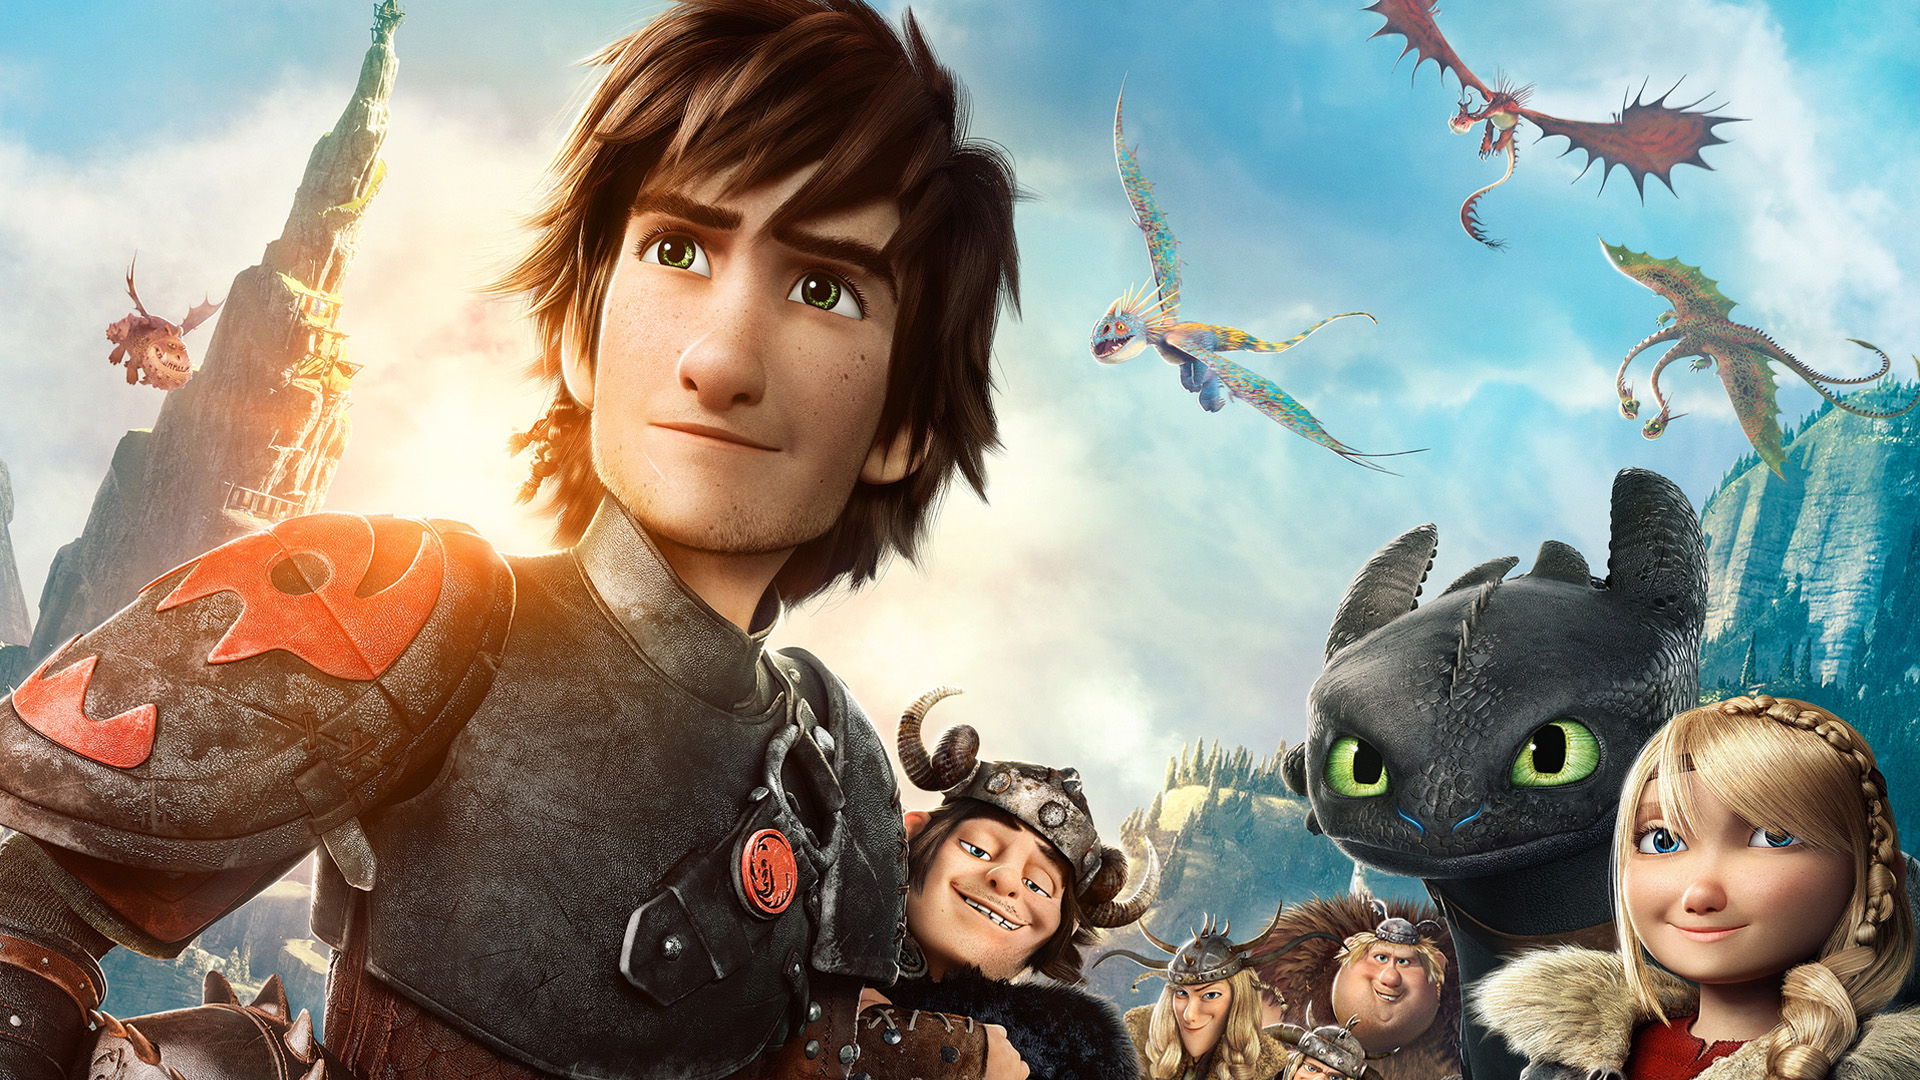 astrid (how to train your dragon), movie, how to train your dragon 2, fishlegs (how to train your dragon), hiccup (how to train your dragon), ruffnut (how to train your dragon), snotlout (how to train your dragon), toothless (how to train your dragon), how to train your dragon